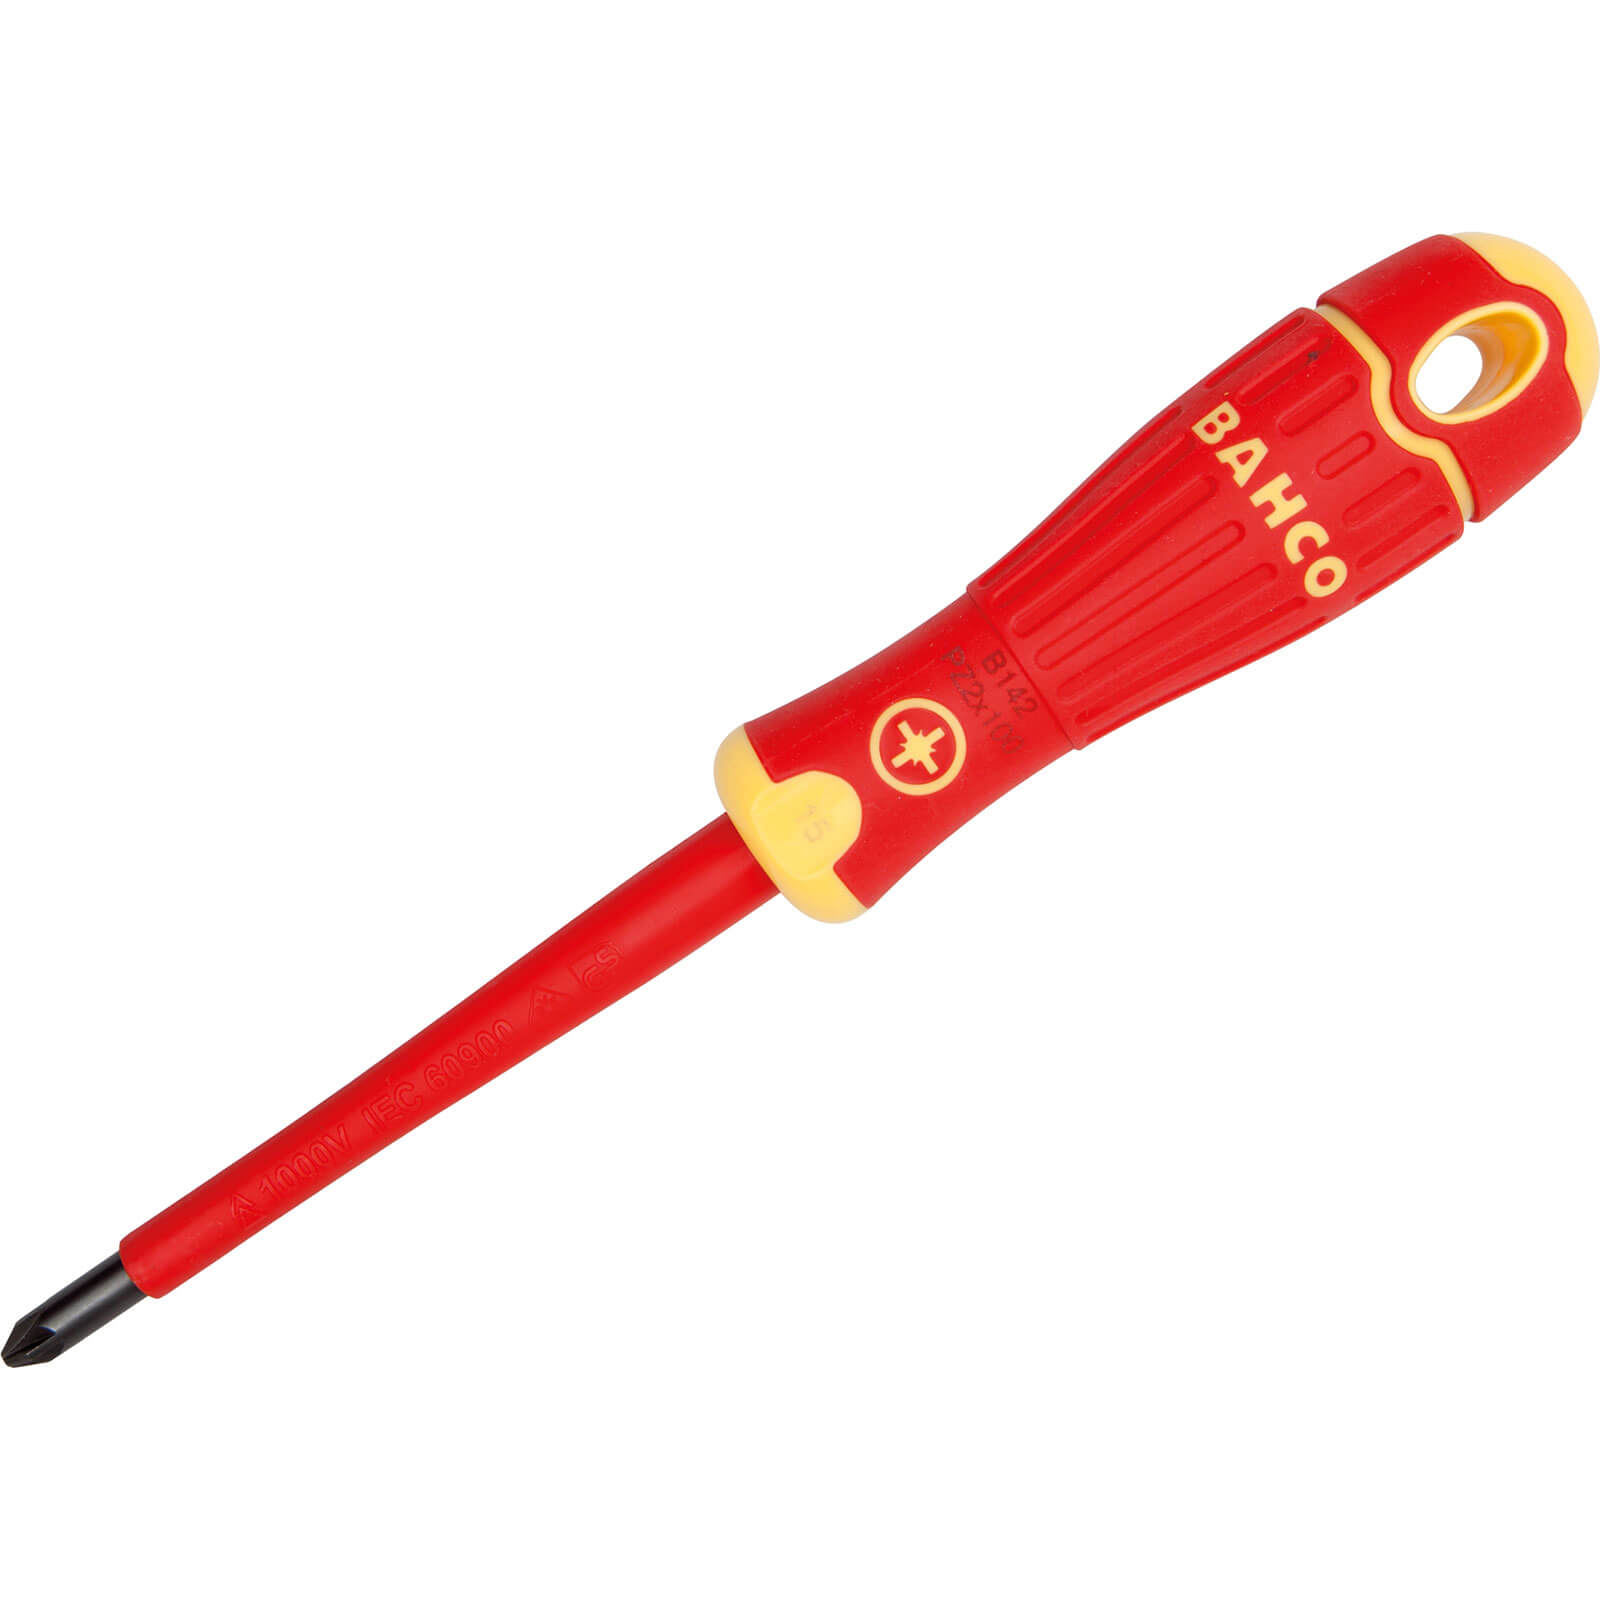 Photo of Bahco Vde Insulated Pozi Screwdriver Pz0 75mm